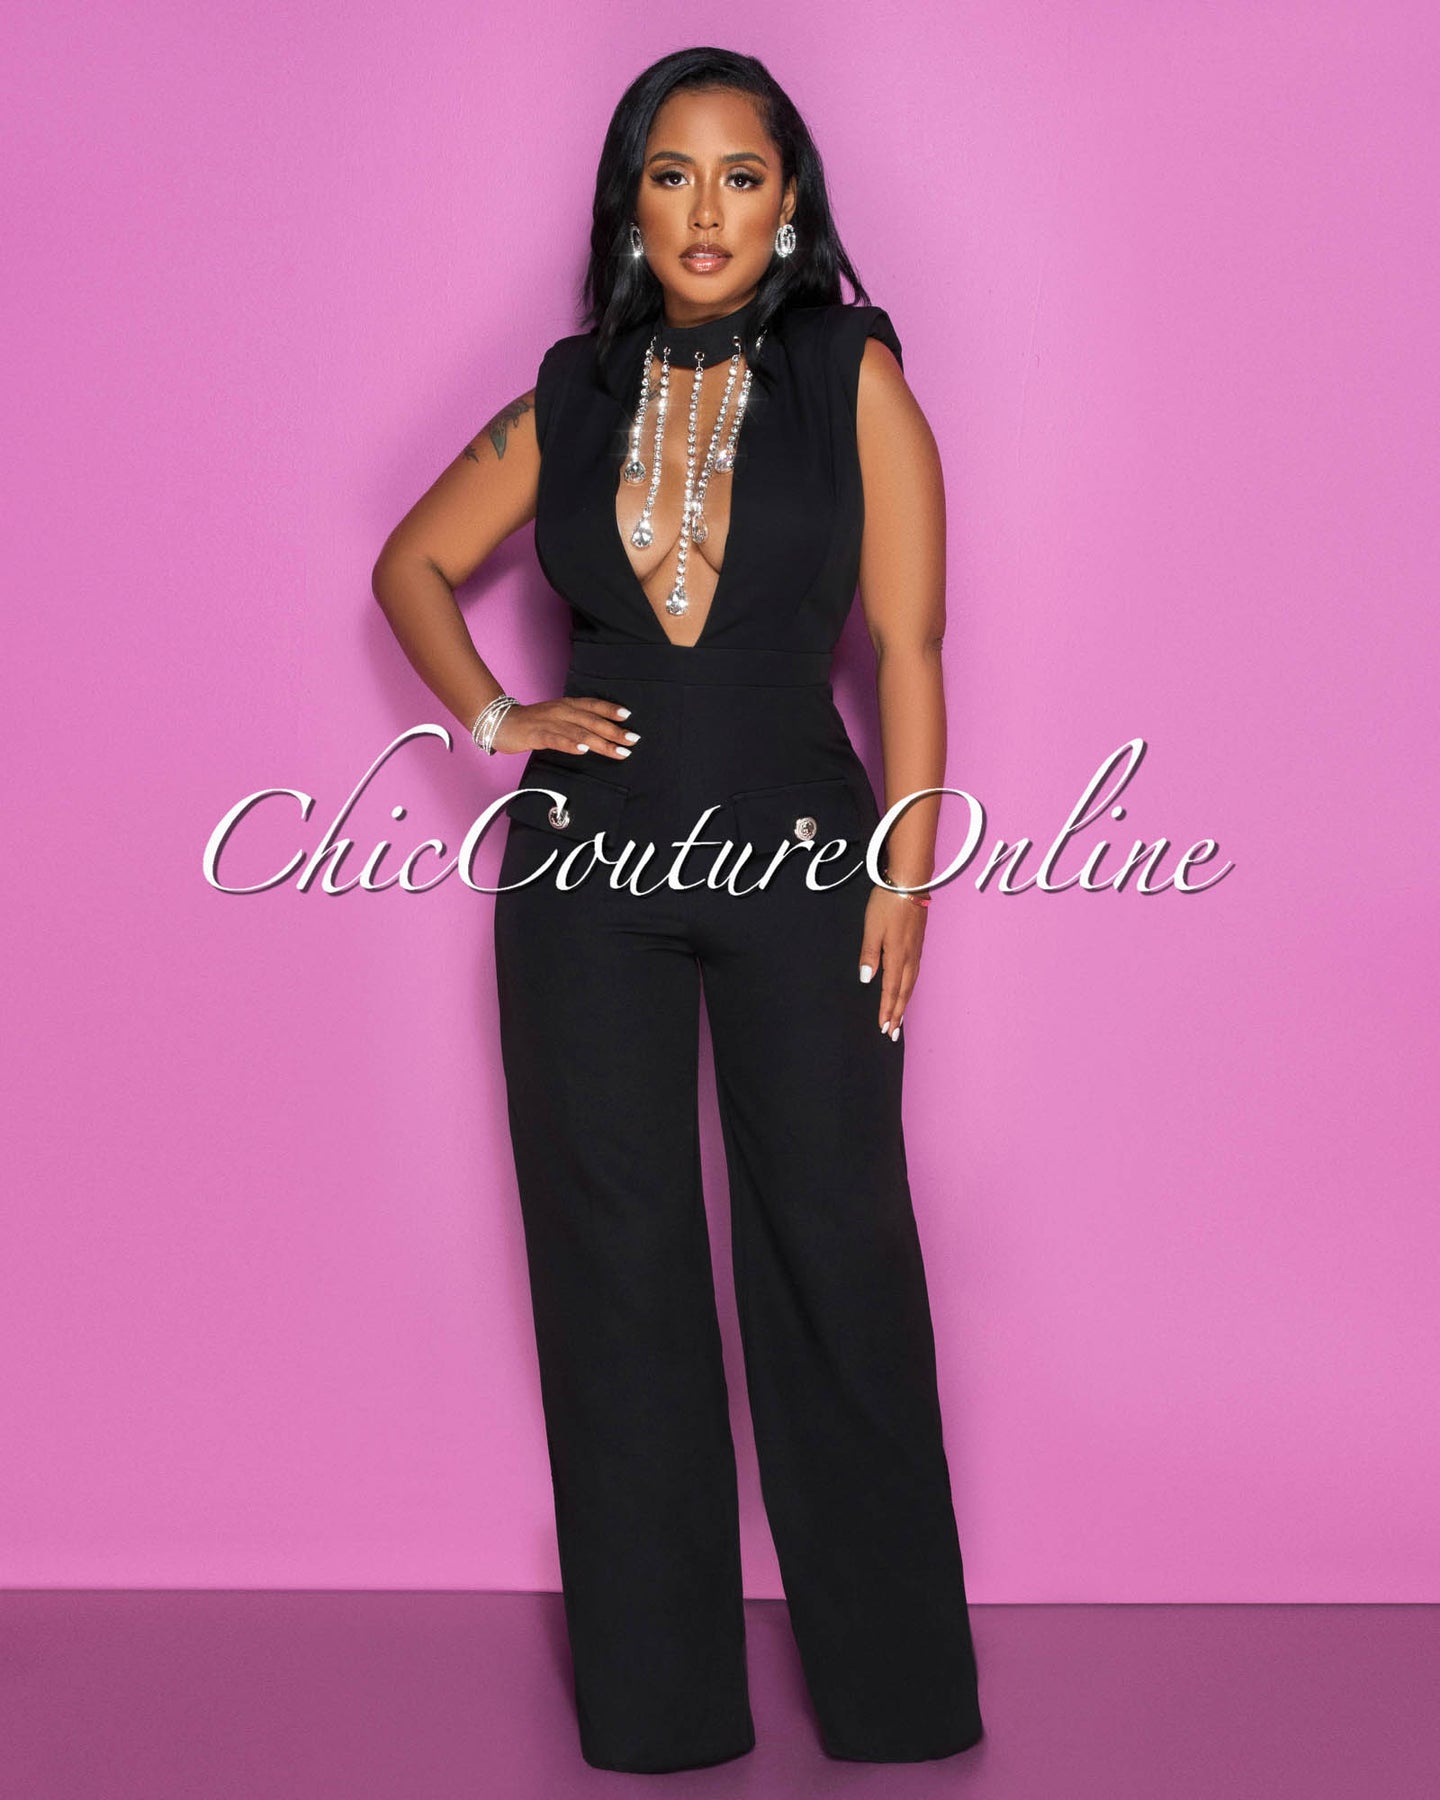 MODEL SIZES – Chic Couture Online